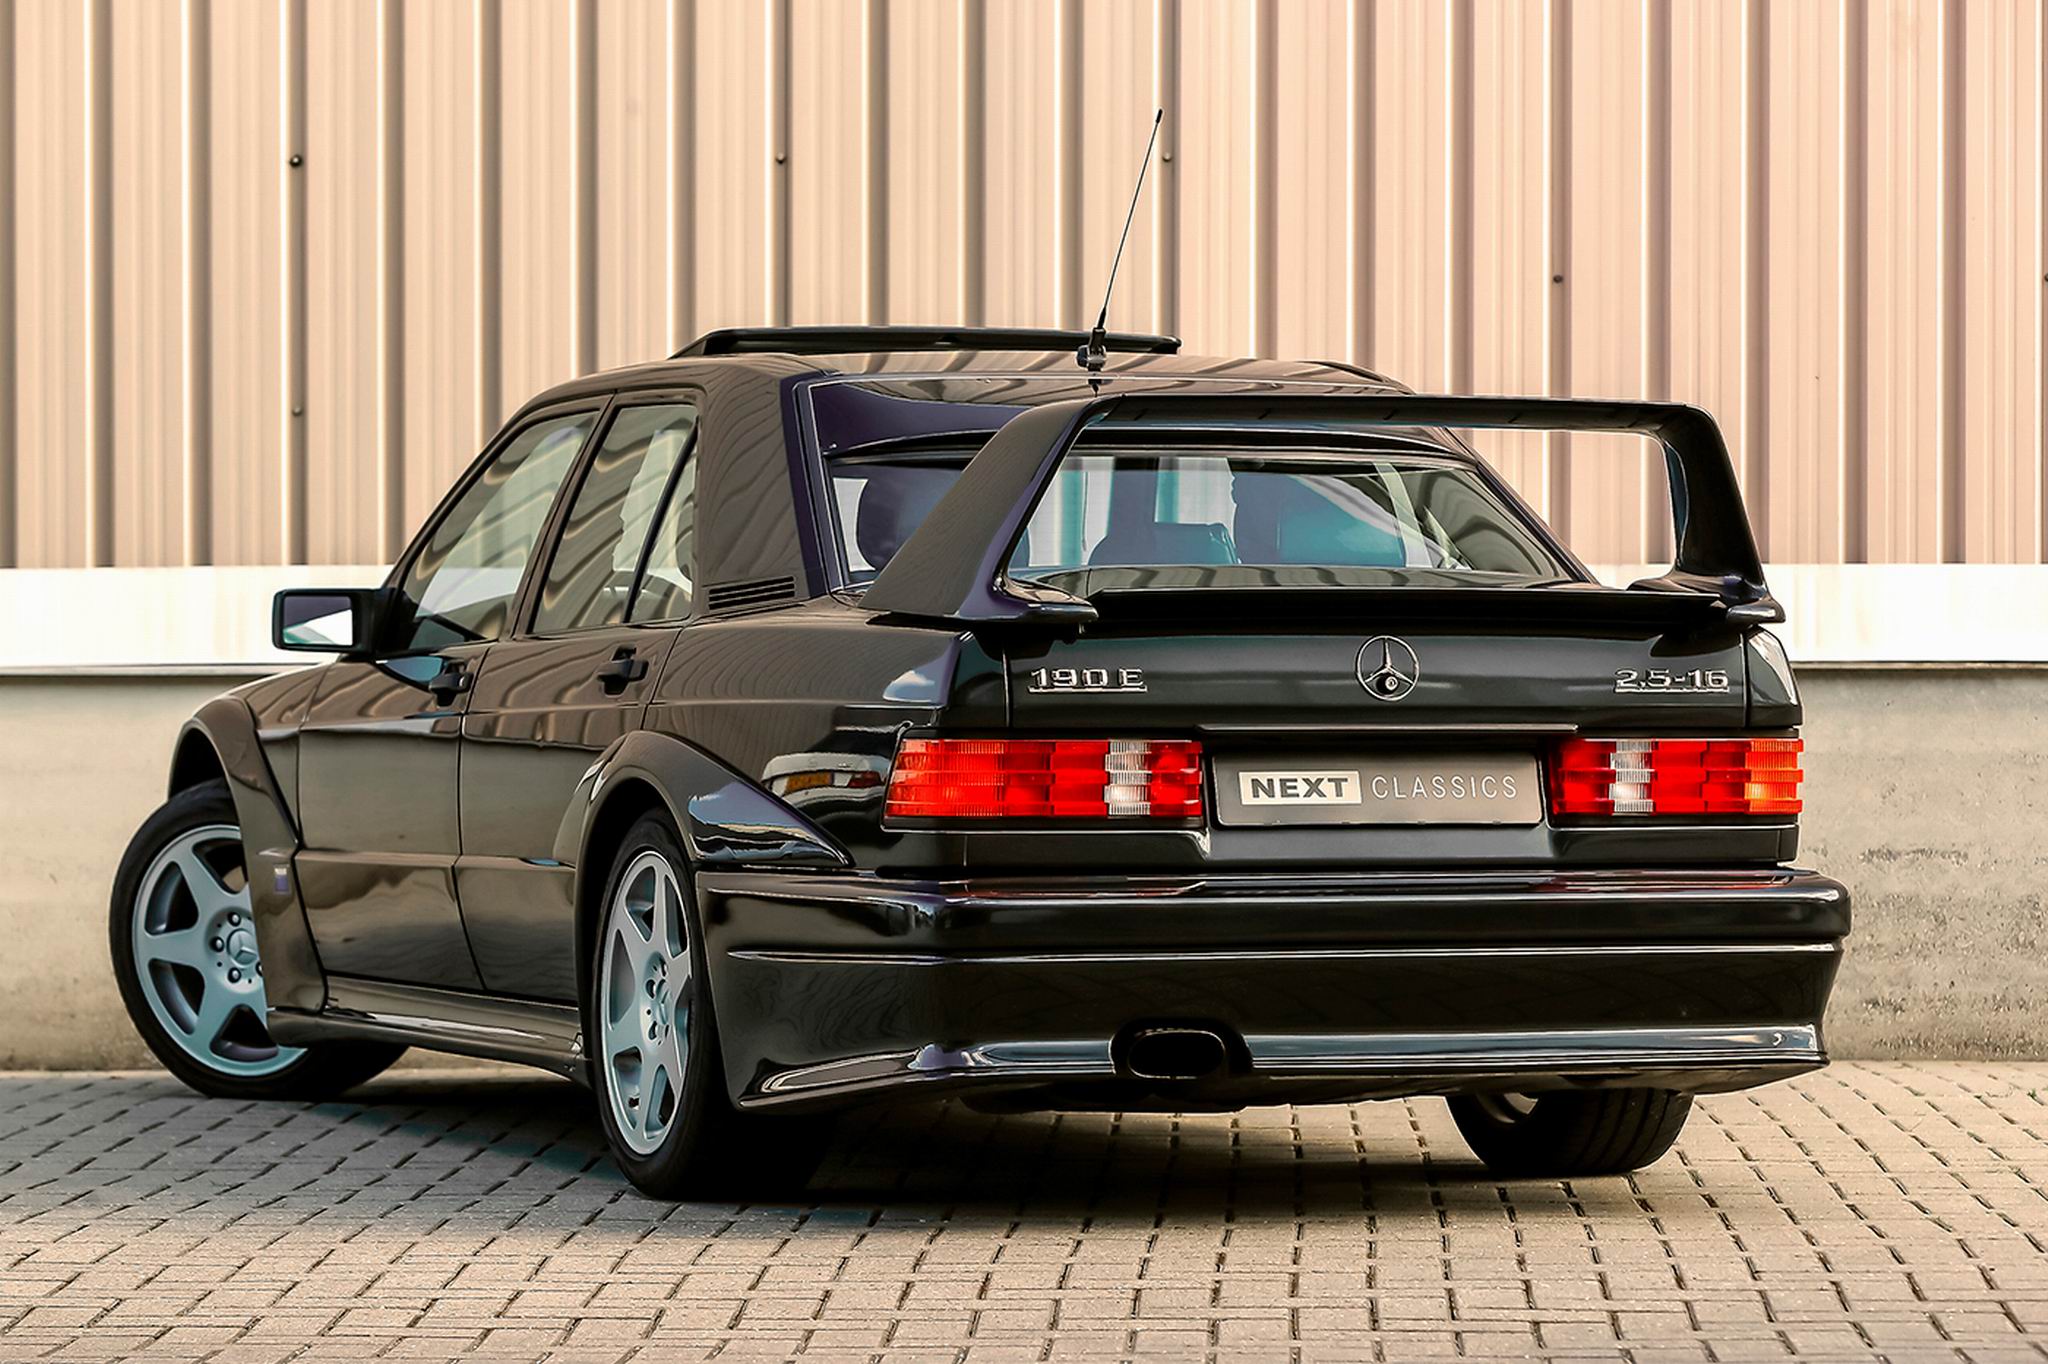 1990 Mercedes Benz 190e 25 16 Evolution Ii Image Abyss